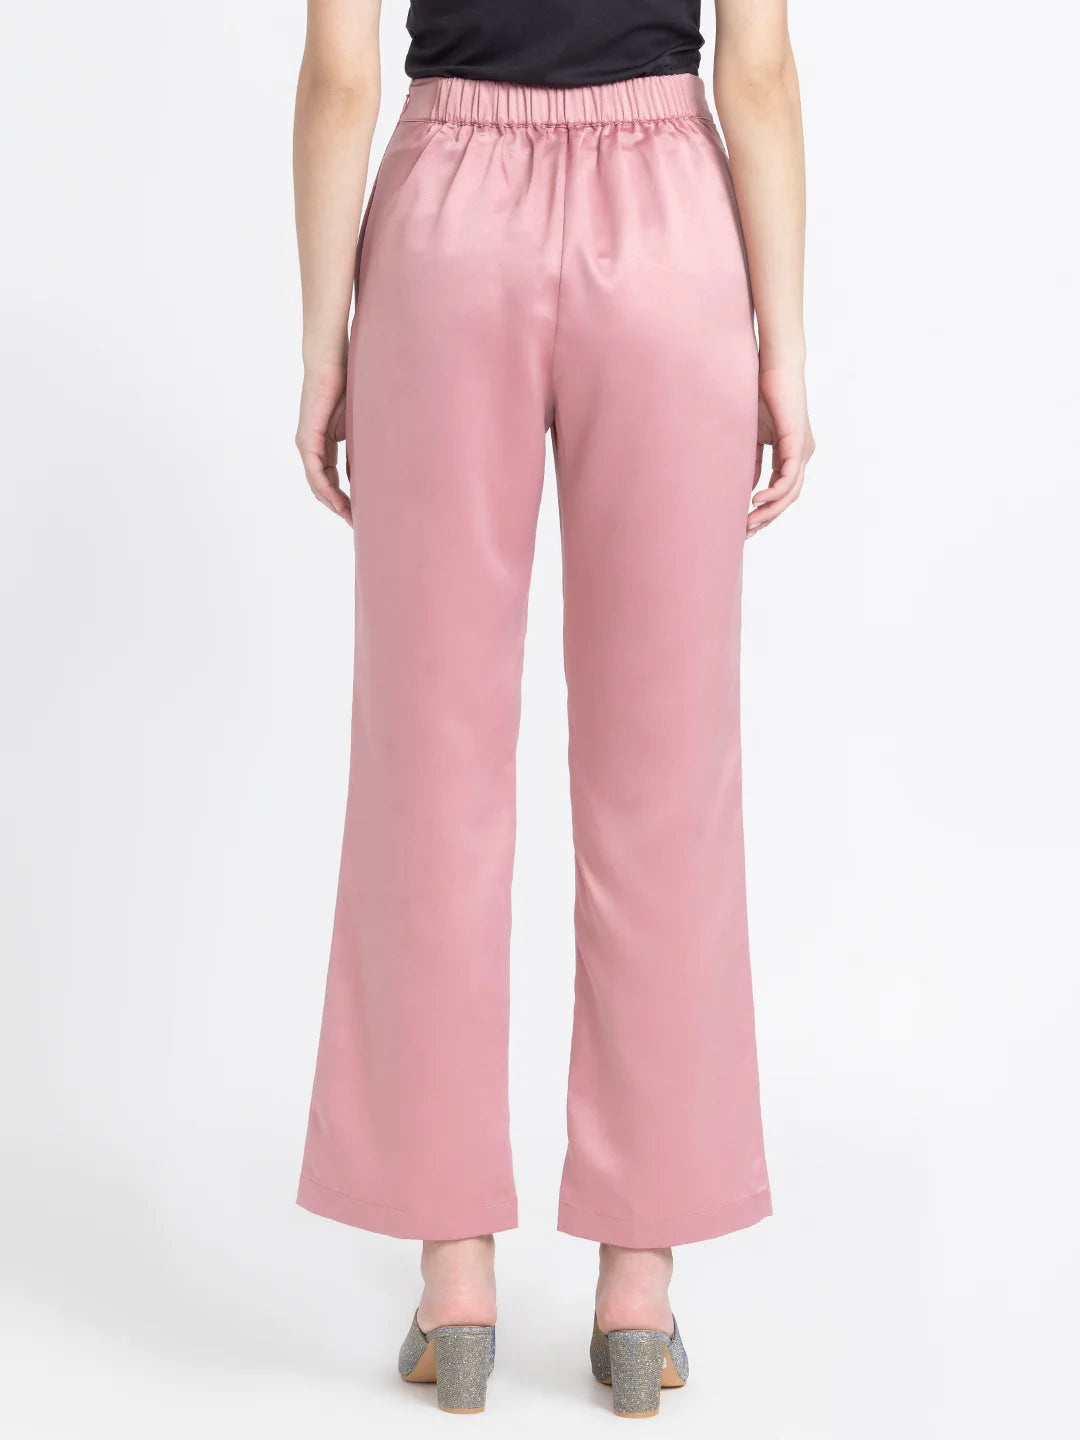 Blush Ankle Pant for Women | Blush Chic Ankle Pant